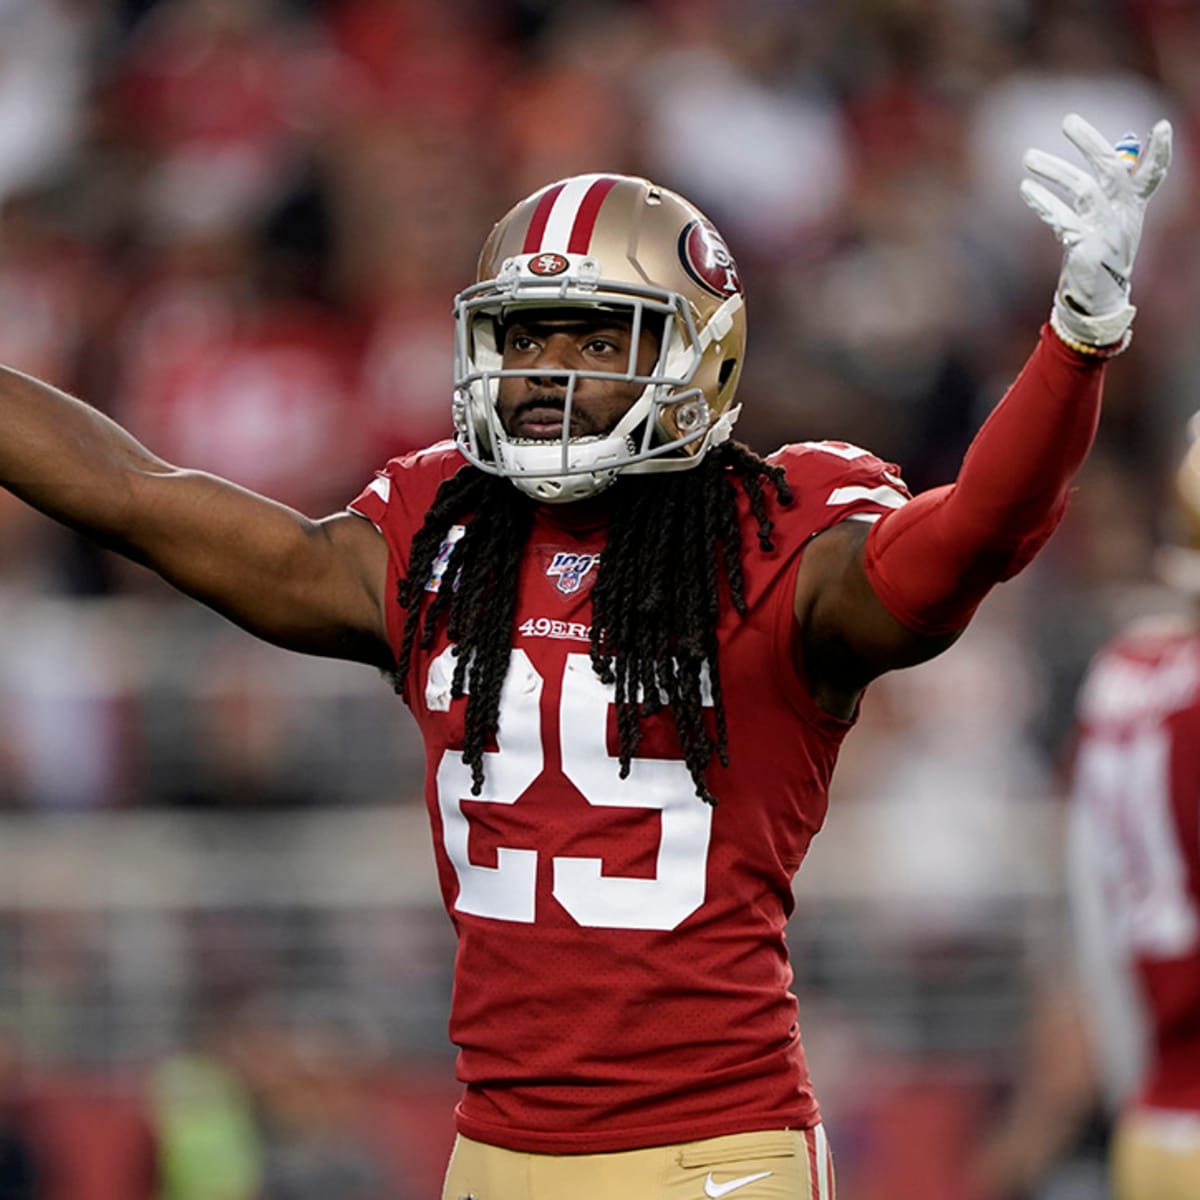 49ers vs. Rams Live Stream: Watch Online, TV Channel, Start Time